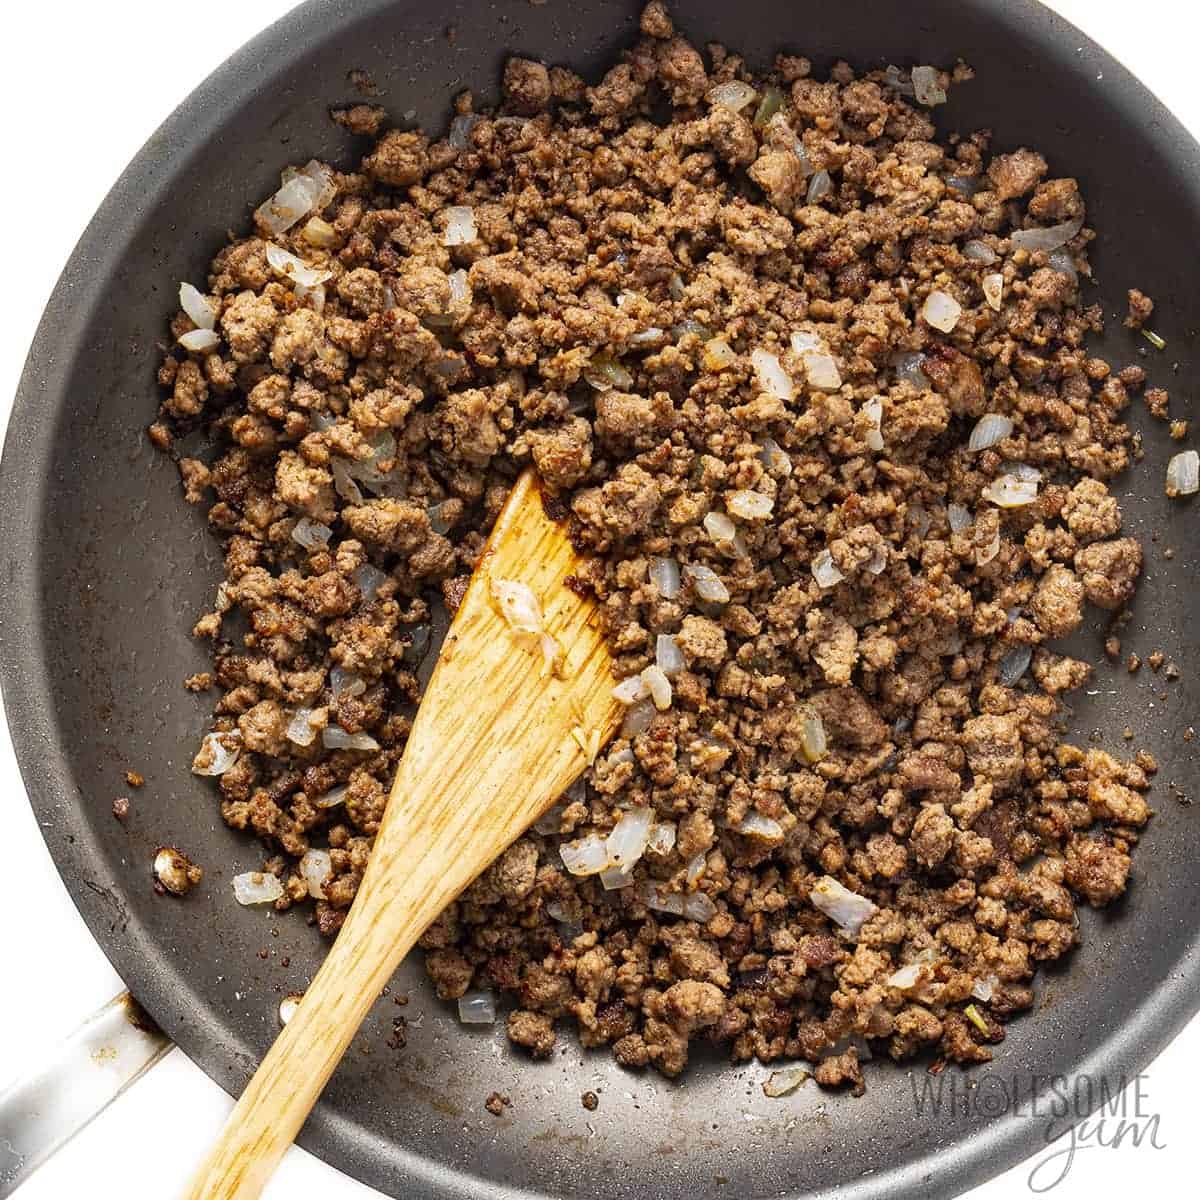 Onions and ground beef in a skillet